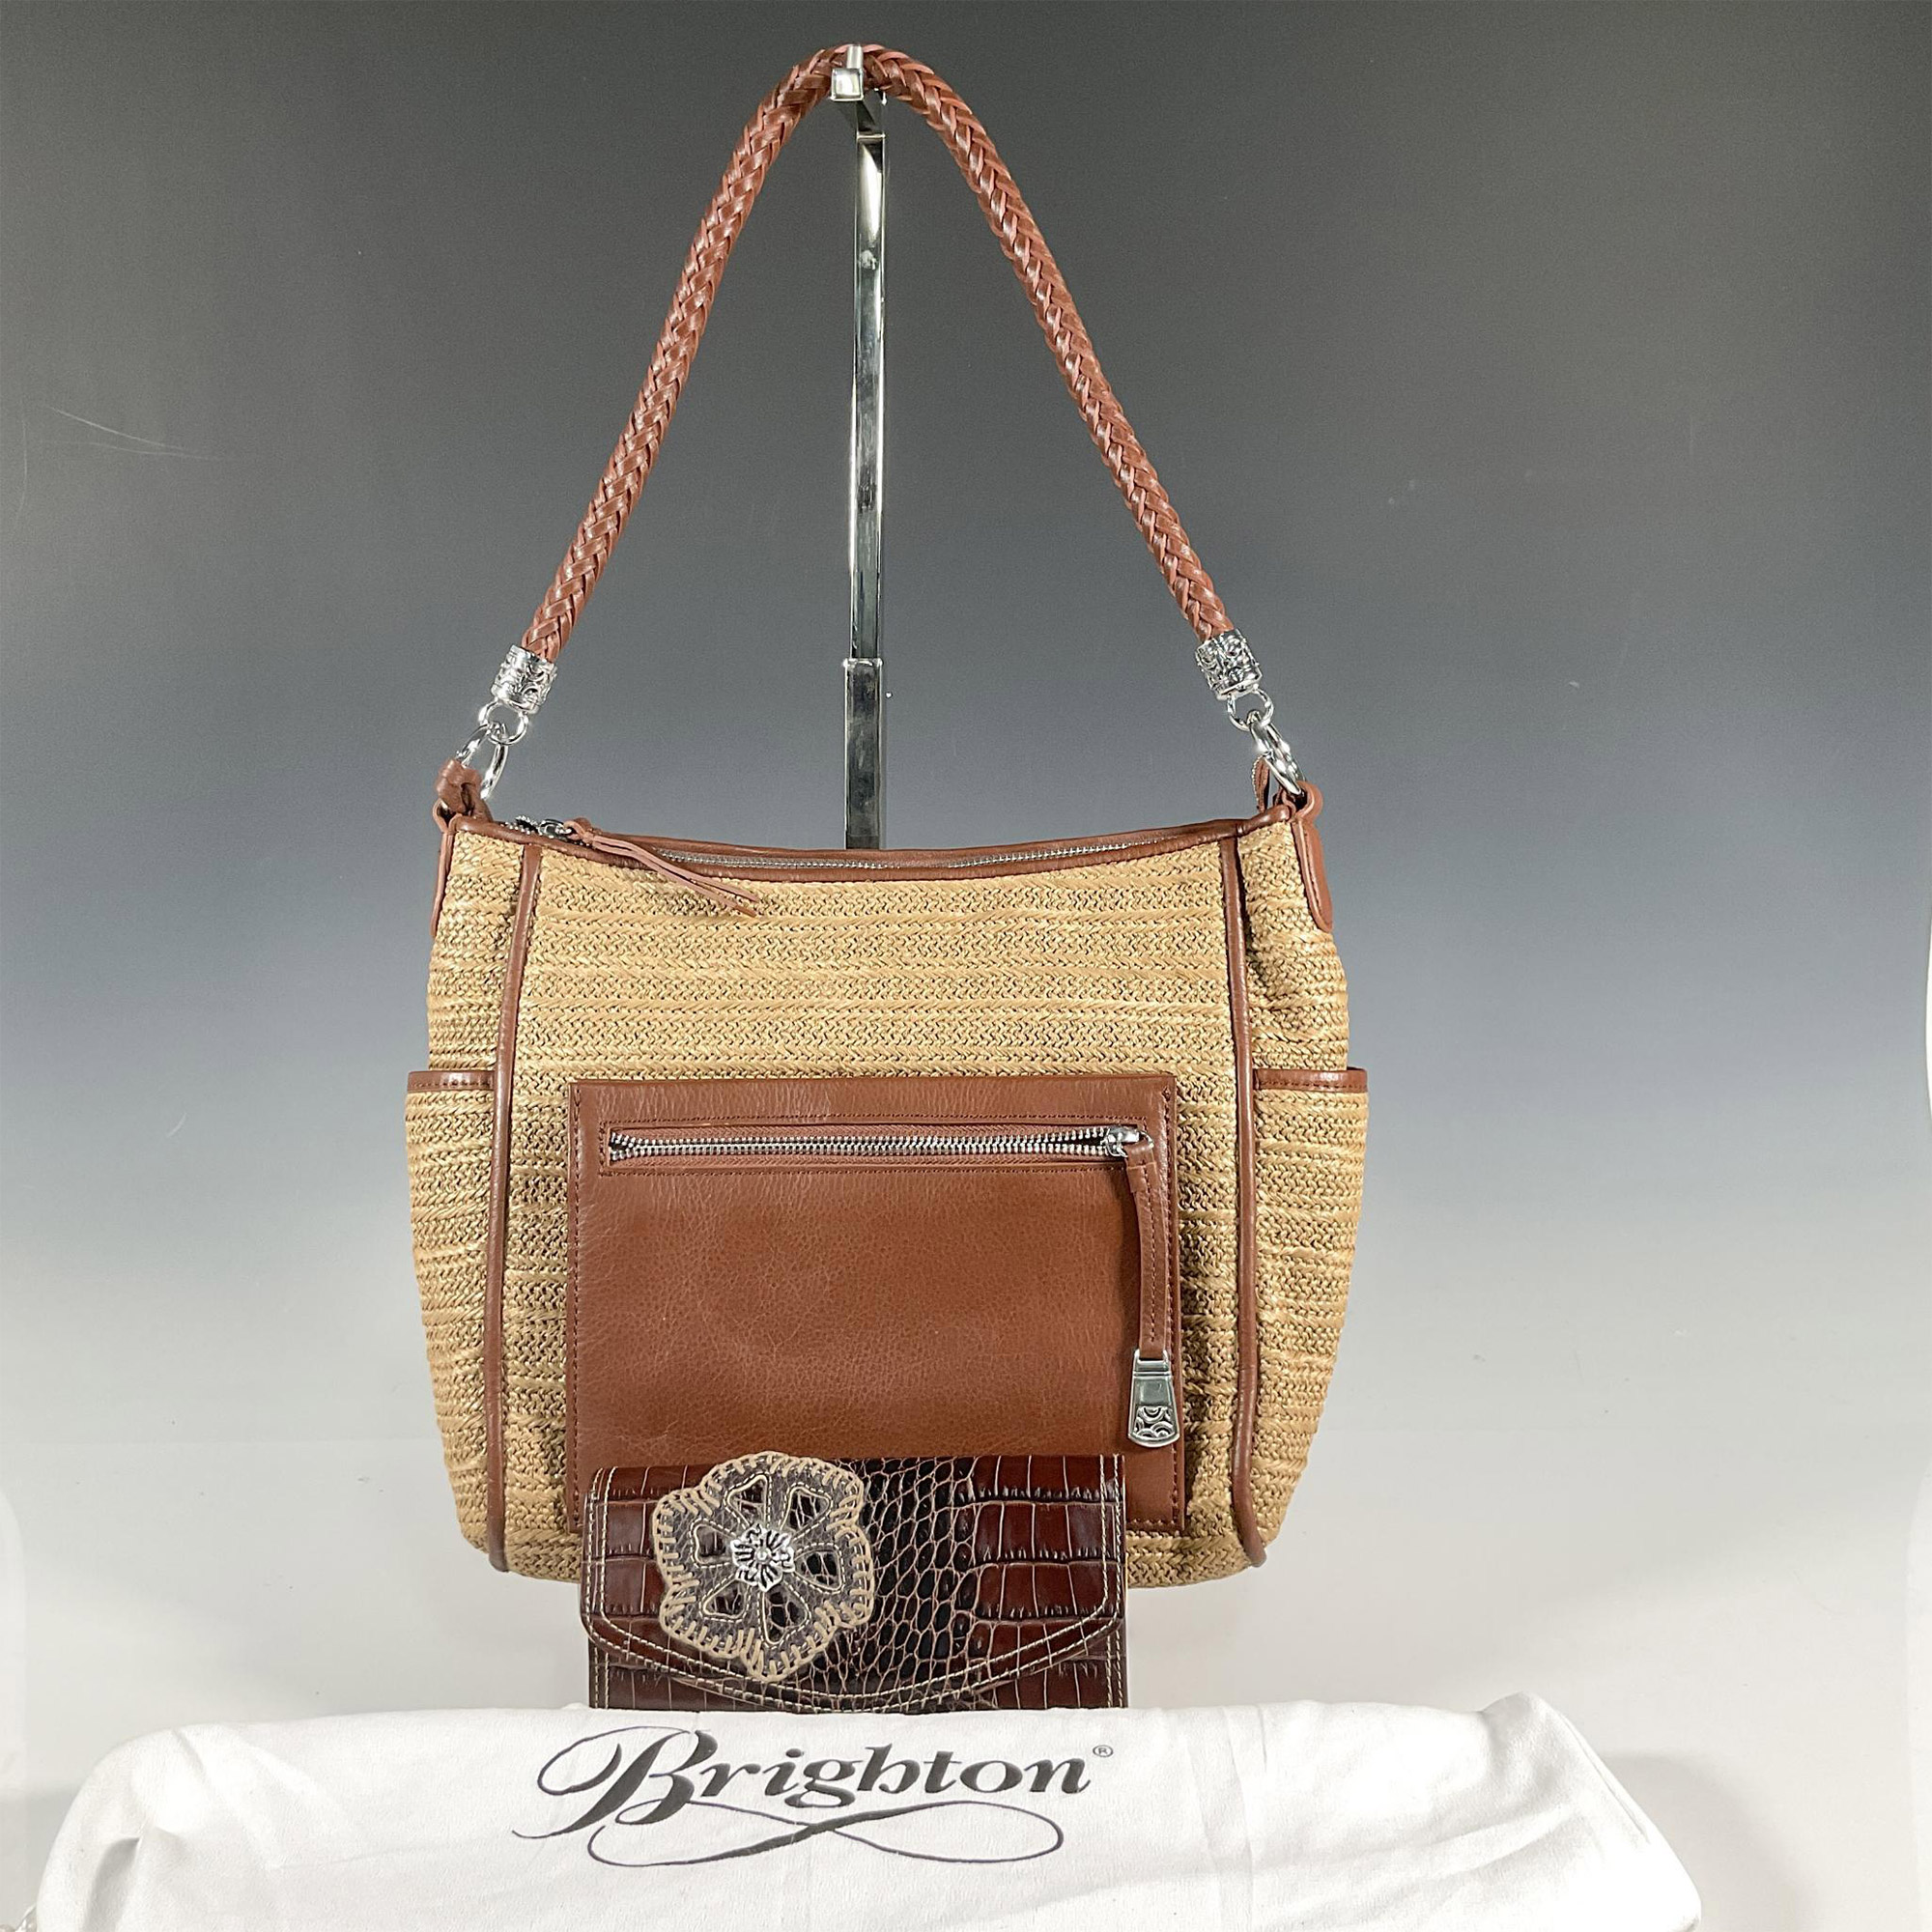 2pc Brighton Straw Shoulder Purse and Wallet - Image 3 of 4